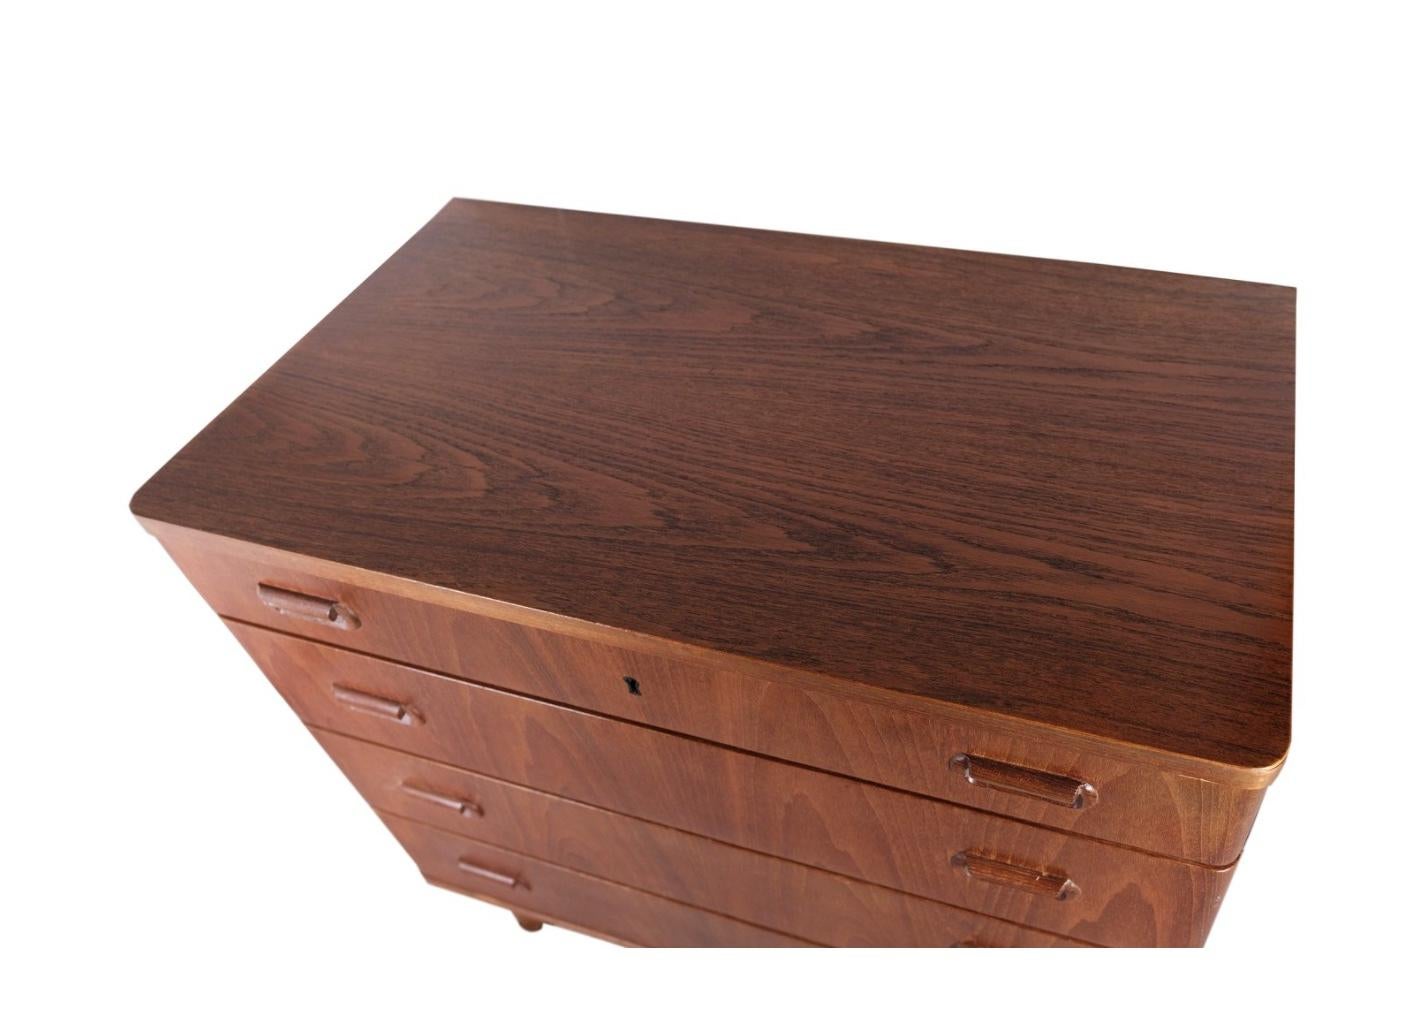 Teak Chest of Drawers with 4 Drawers of Danish Design from the 1960s For Sale 3